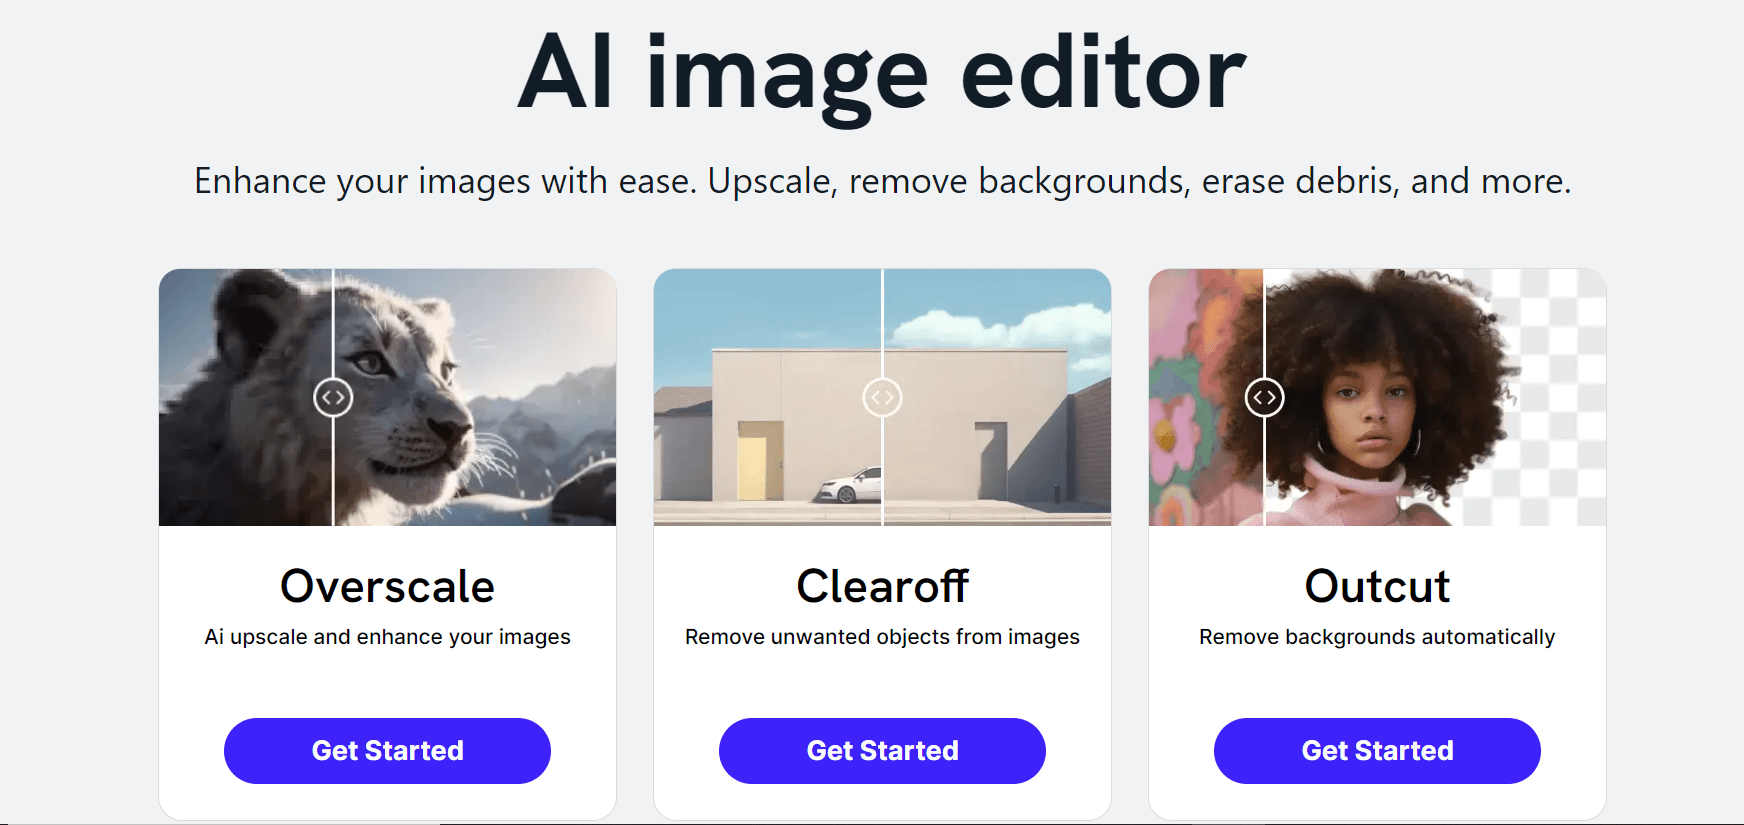 Interface of Imagewith.ai Image Editor